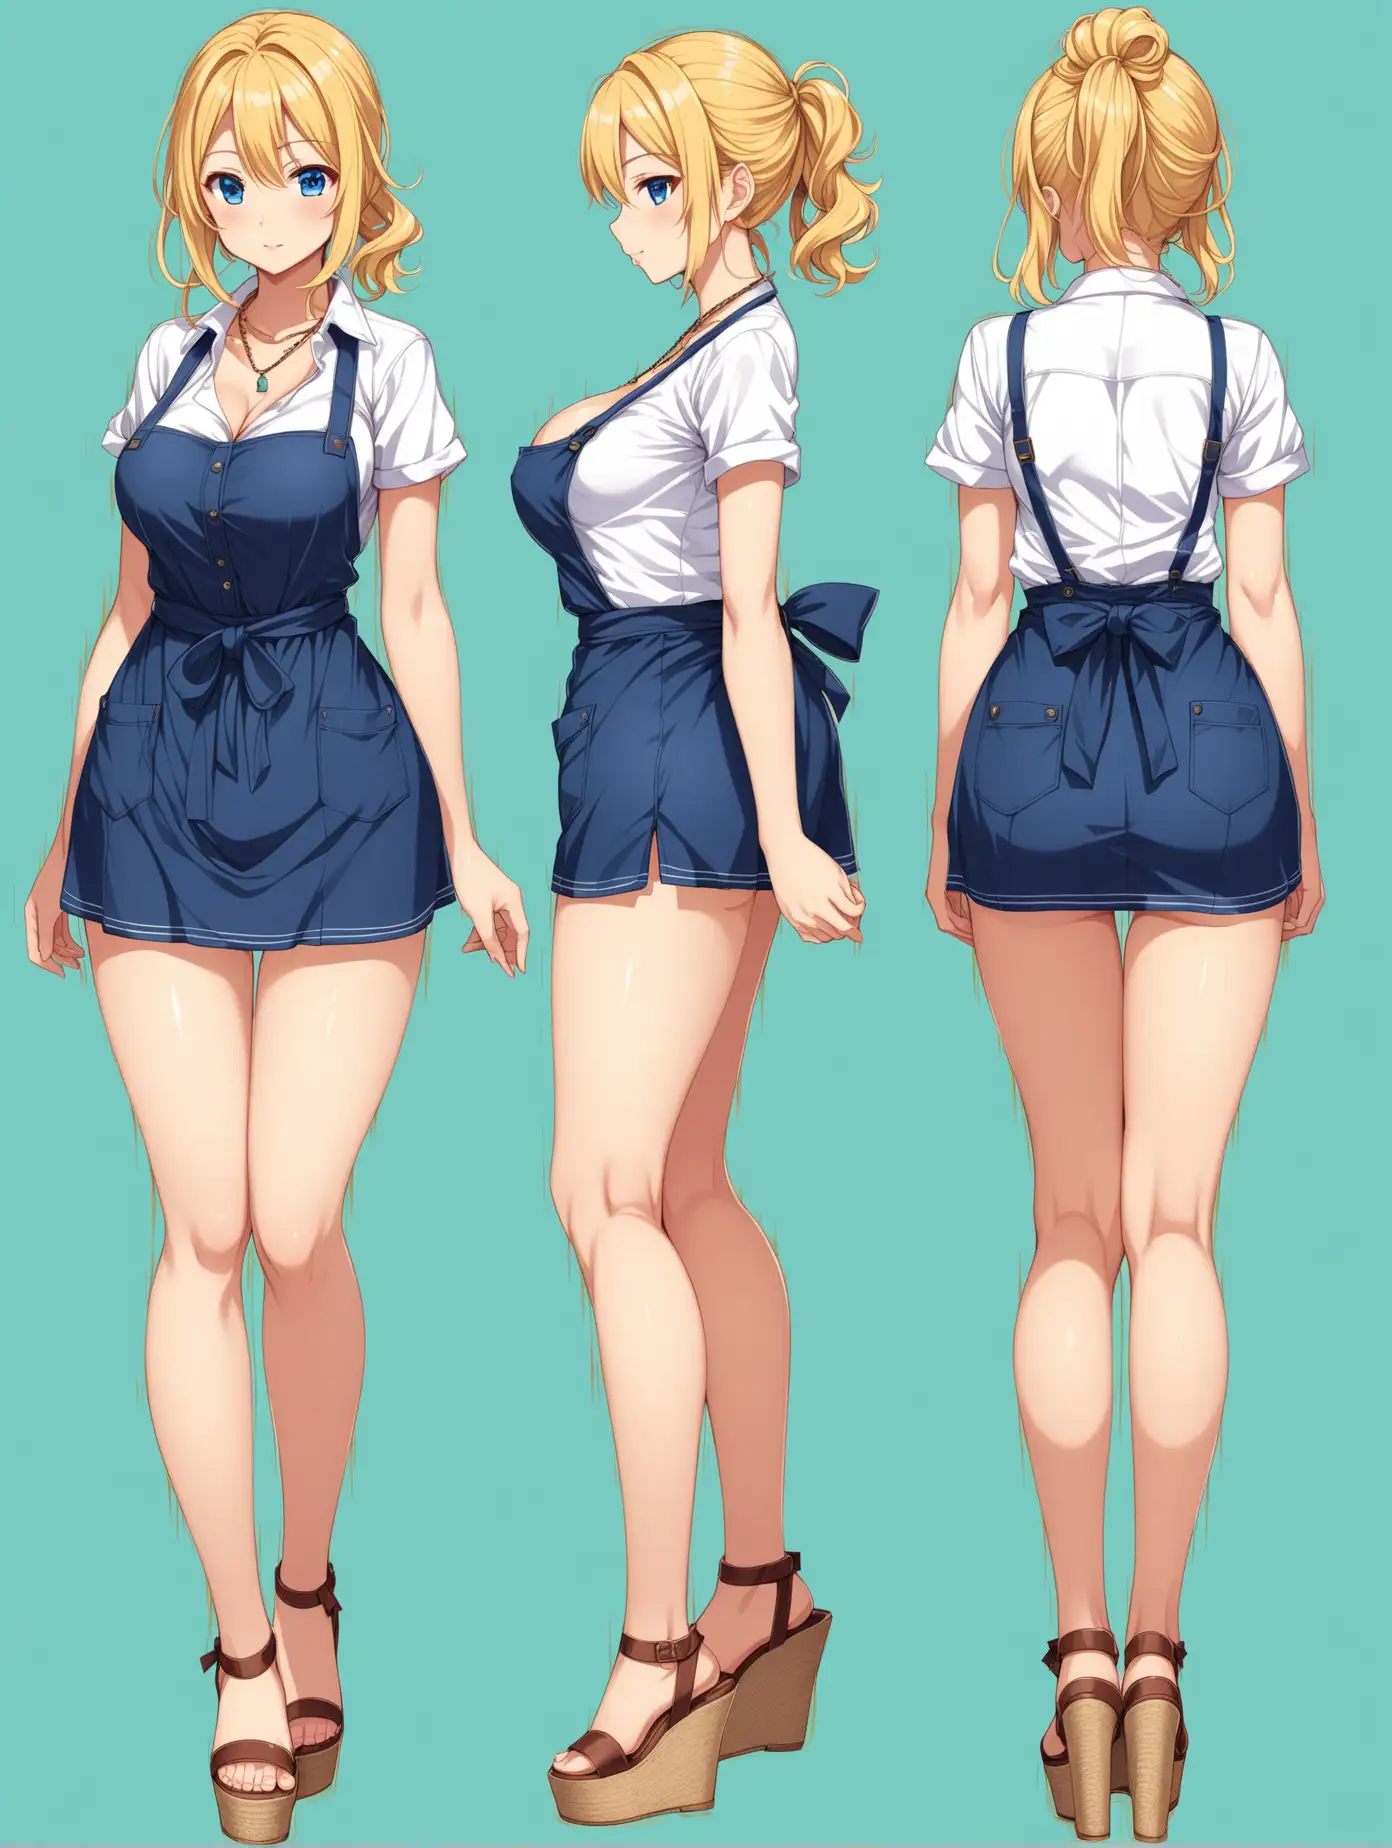 Sensual-Anime-Farmer-Girl-in-Two-Poses-Front-and-Rear-View